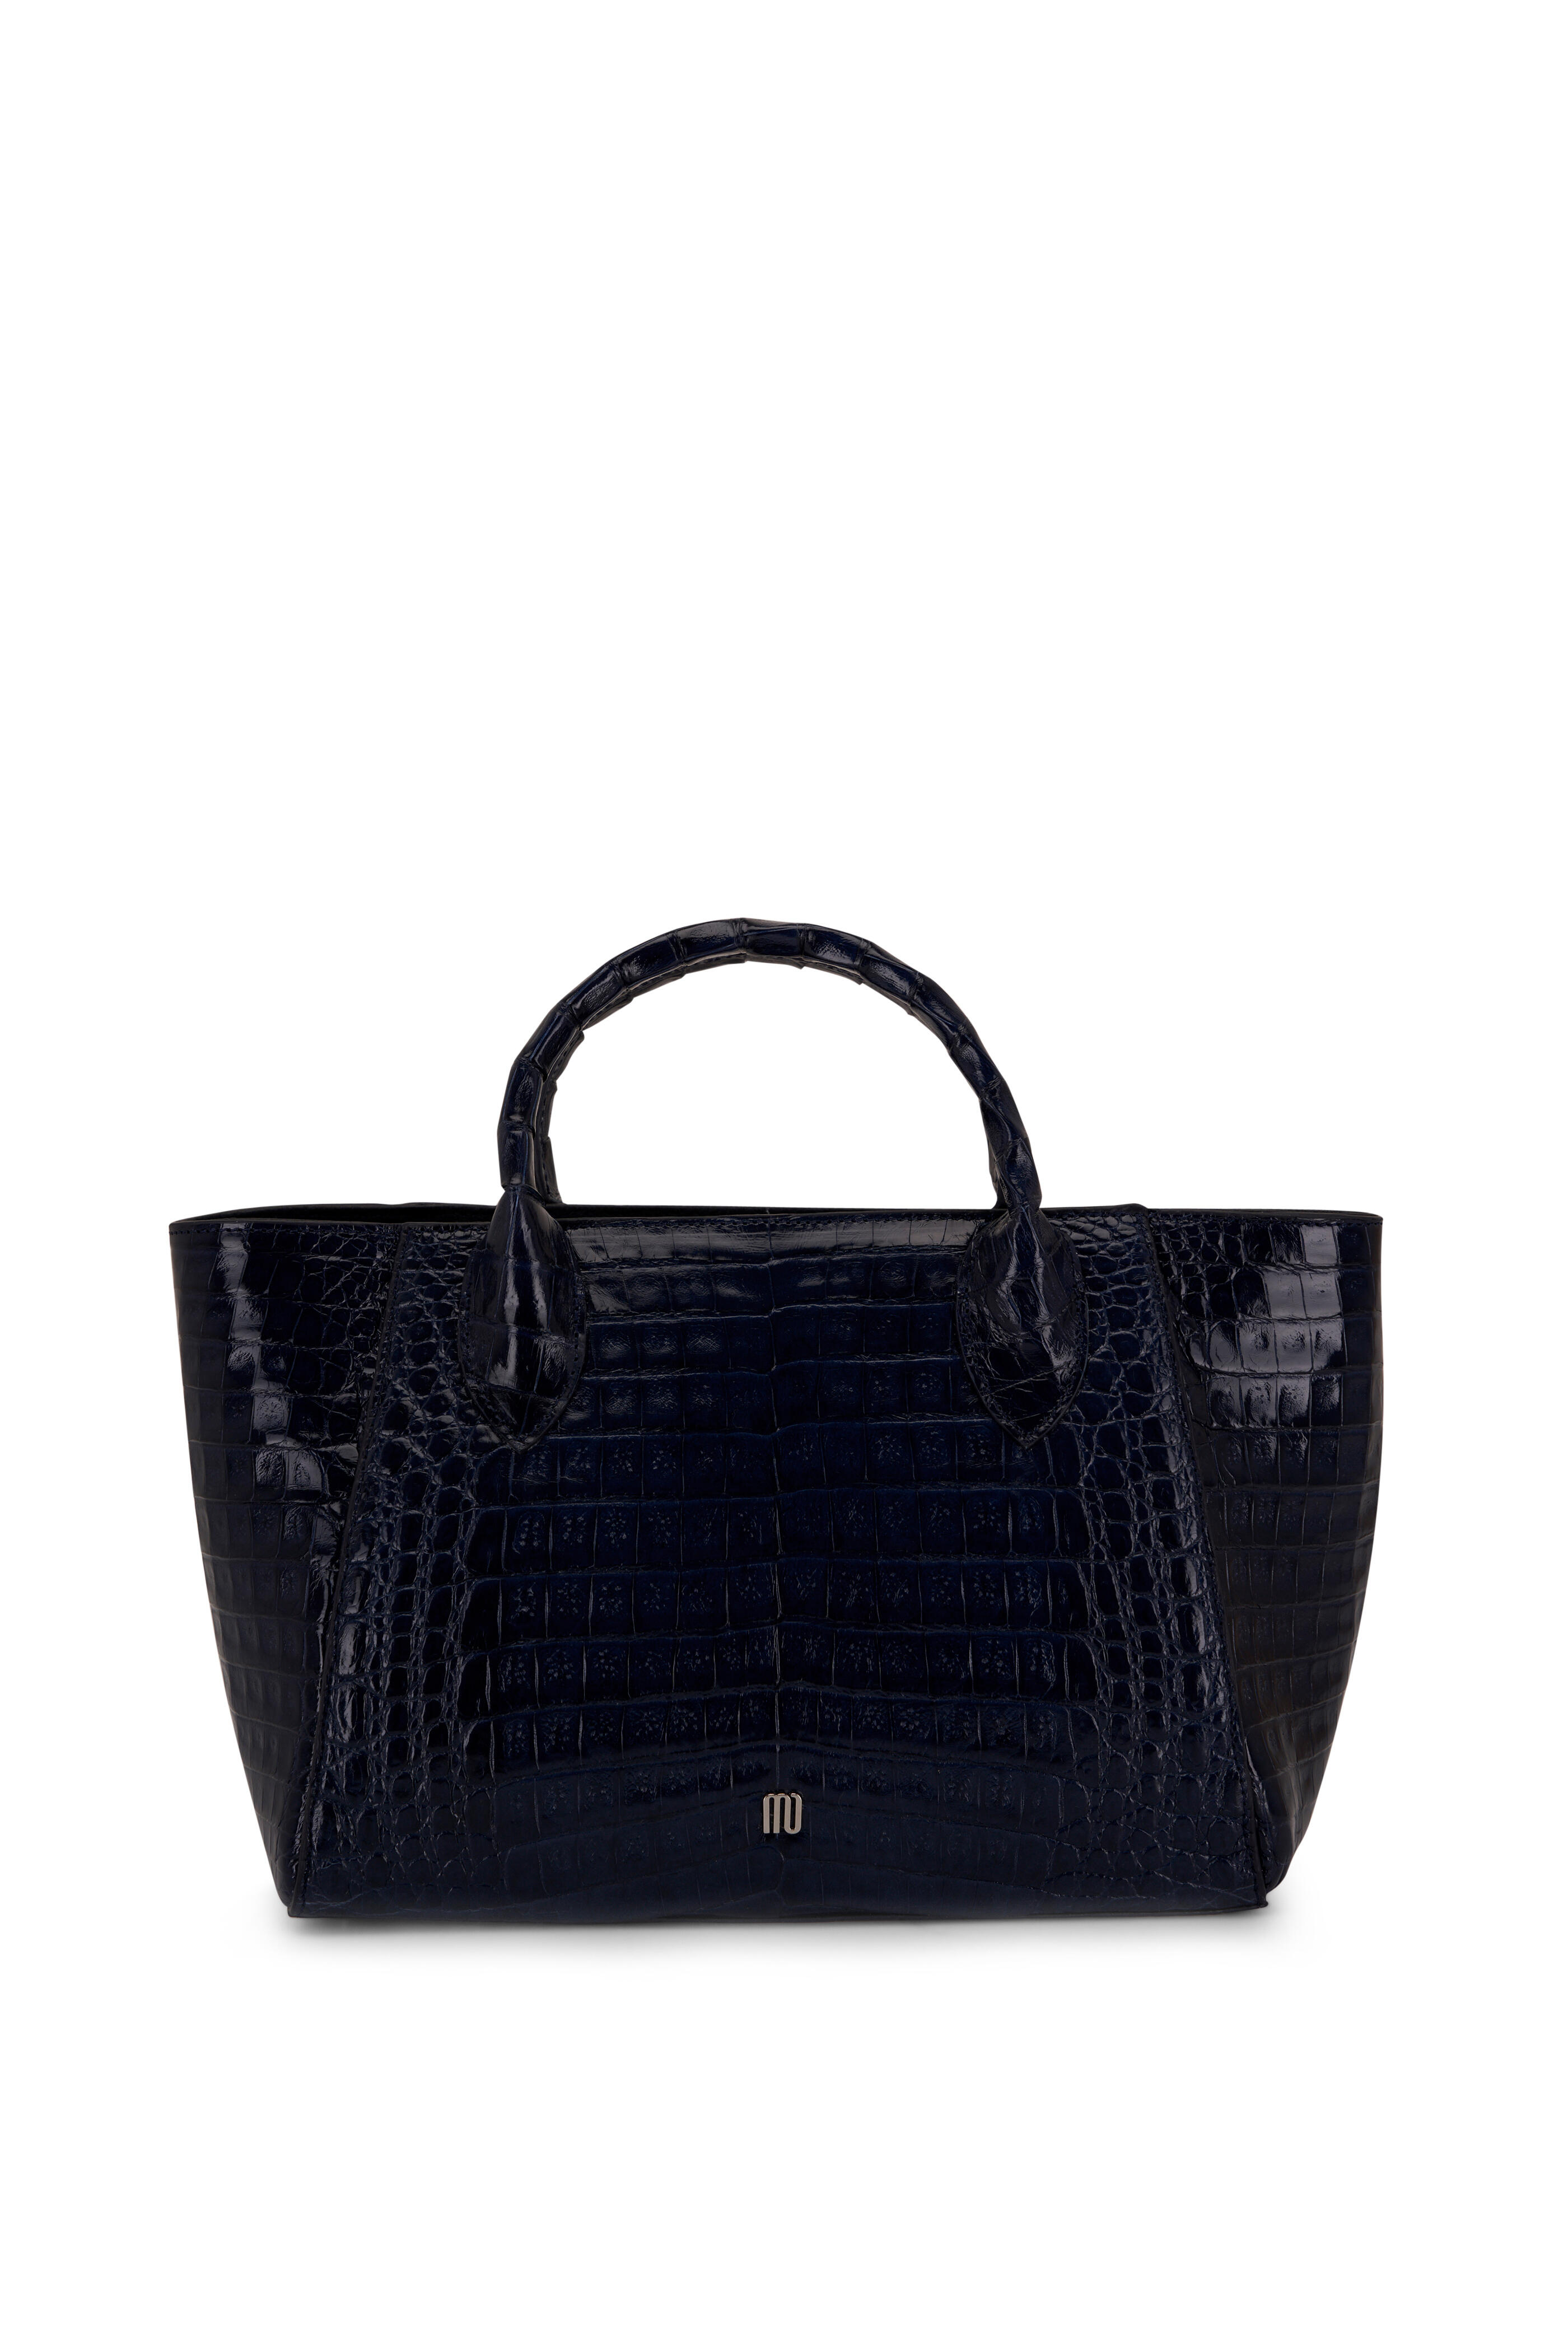 Maria Oliver - Virginia Navy Blue Shiny Leather Tote